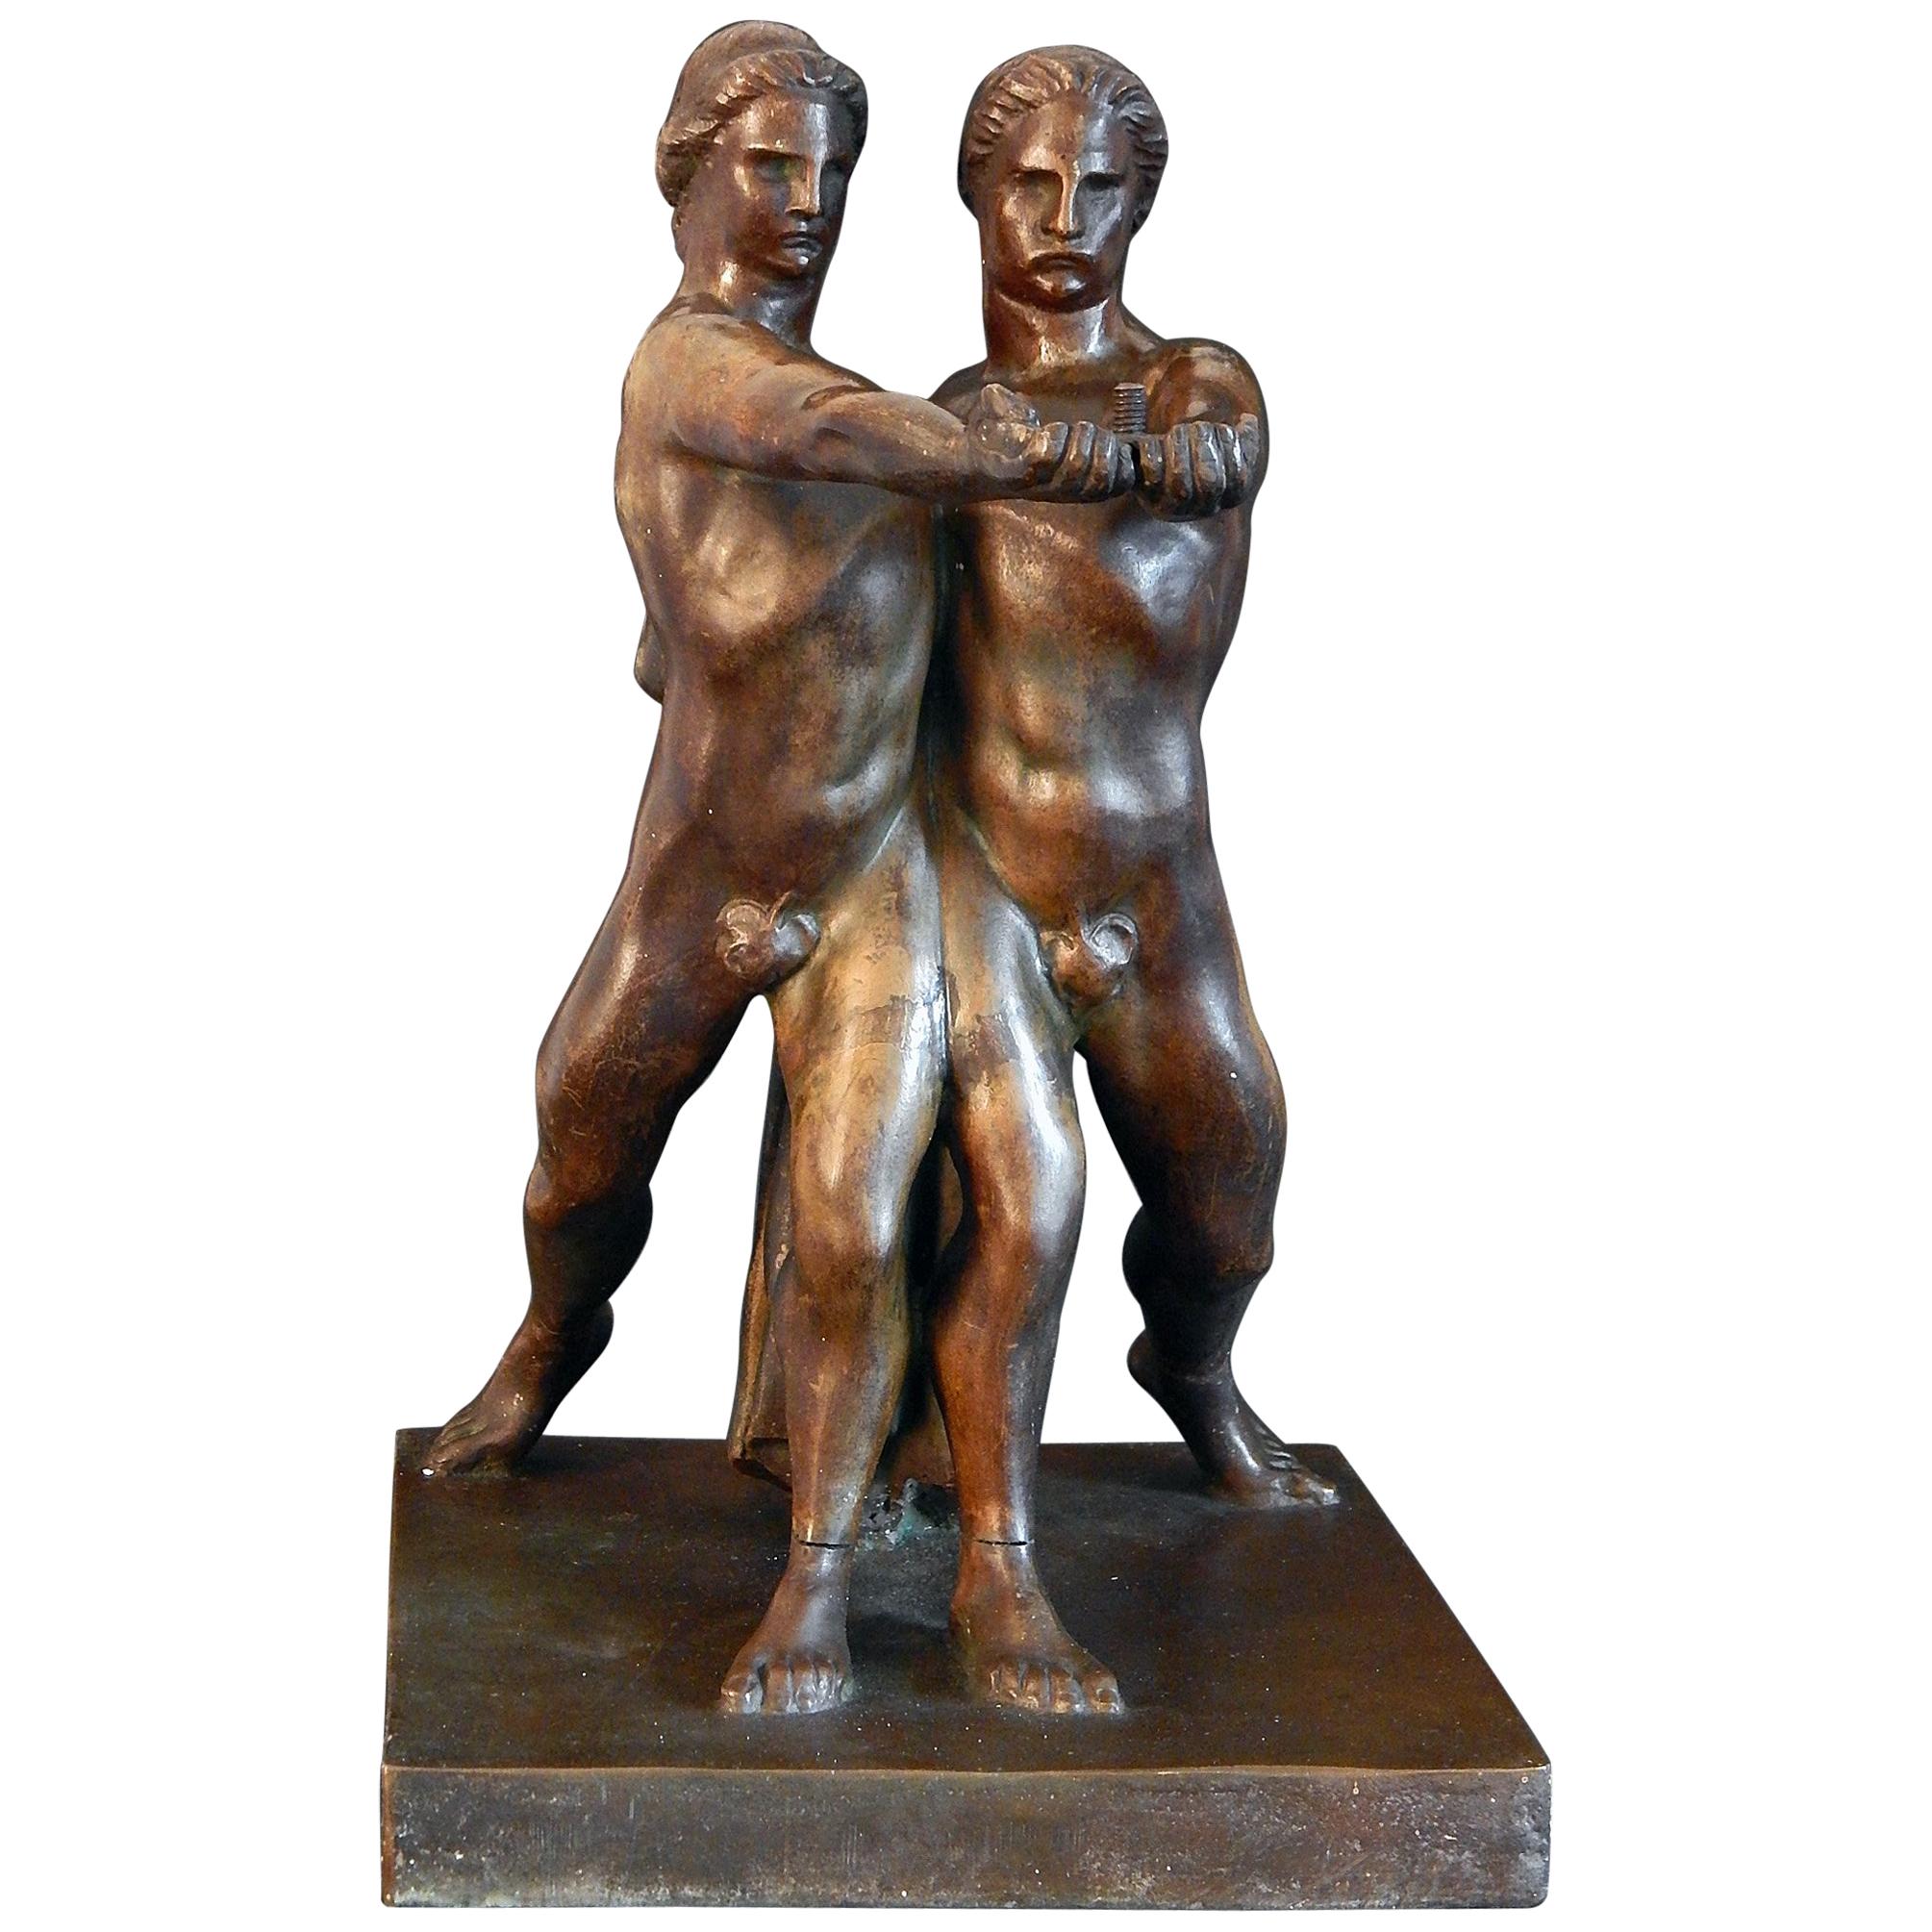 "Two Athletes in Unity, " Unique 1930s Italian Art Deco Sculpture with Male Nudes